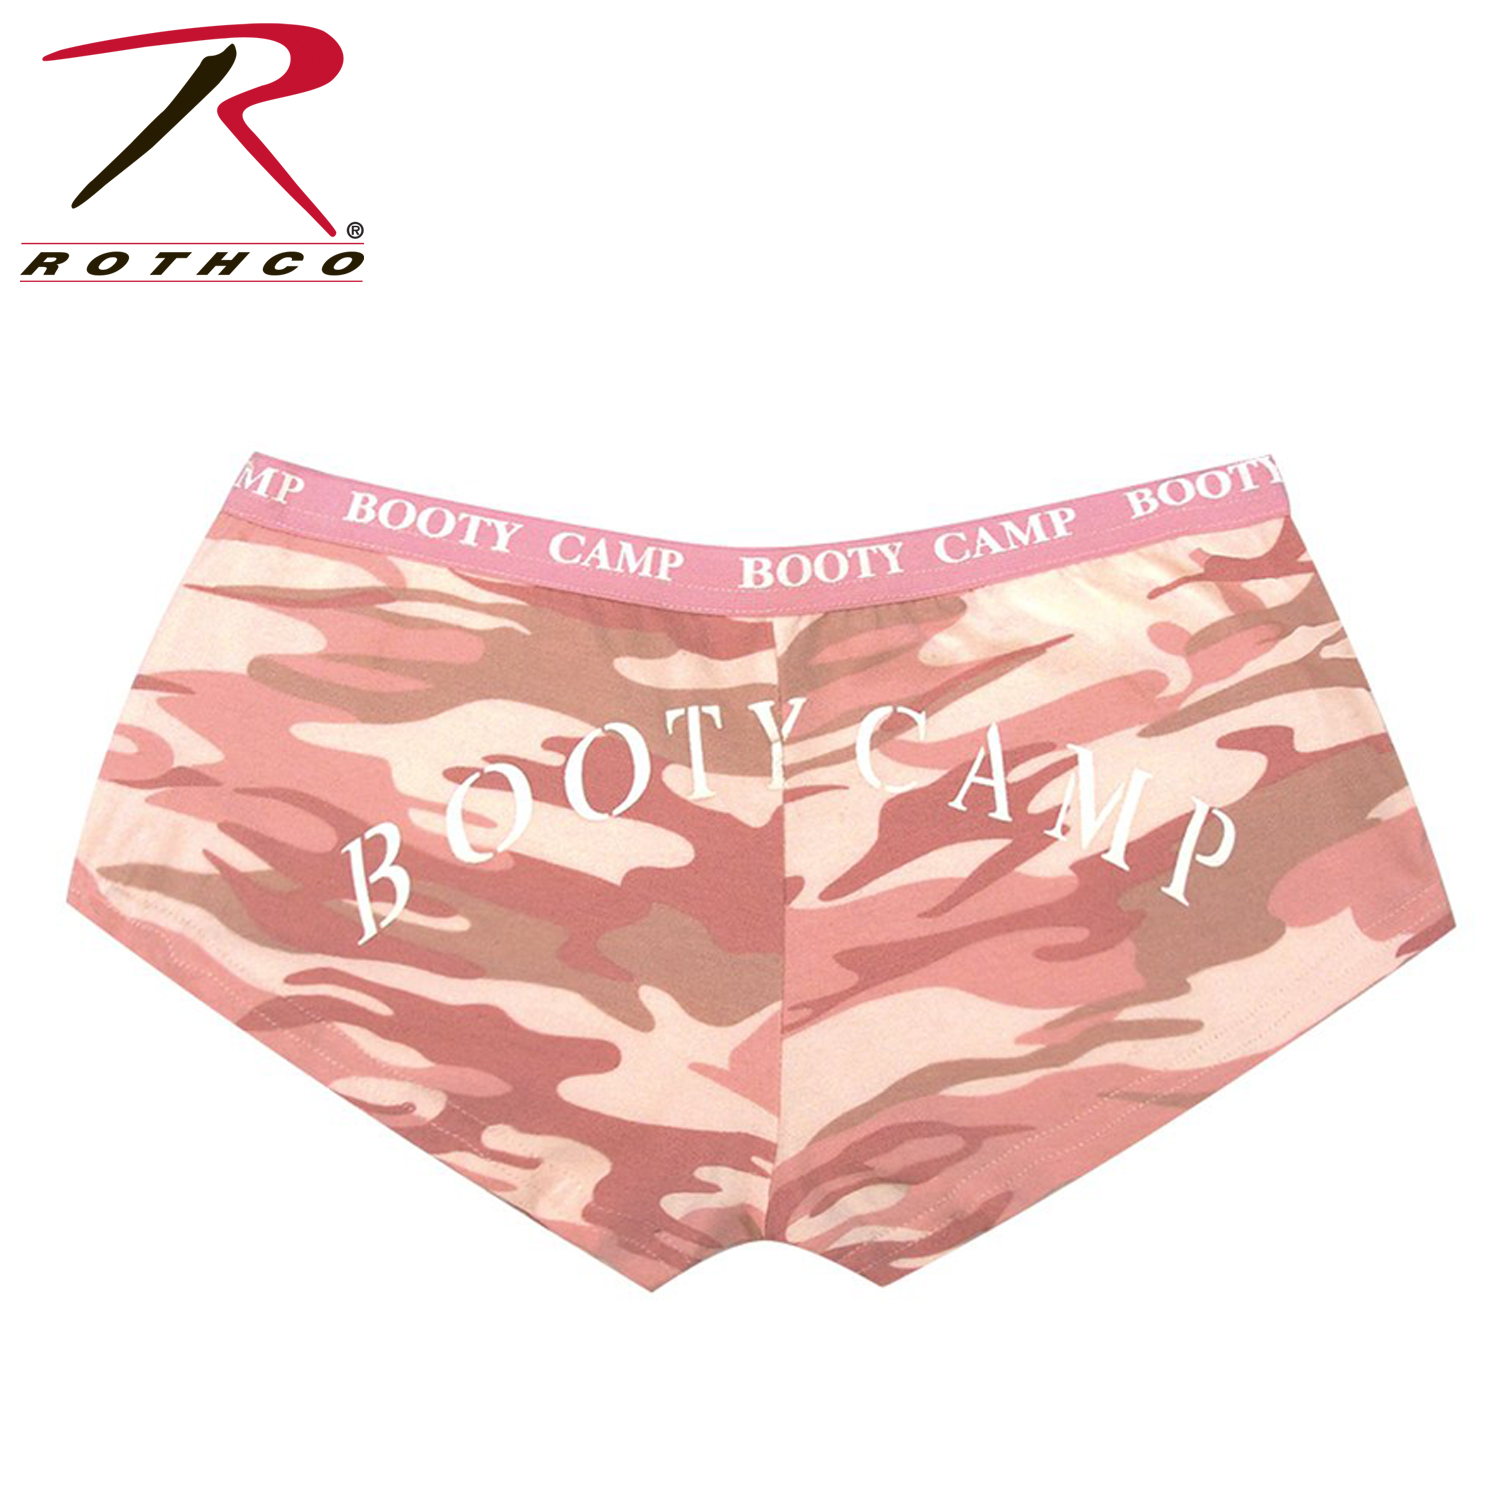 Rothco Baby Pink Camo "Booty Camp" Booty Shorts & Tank Top